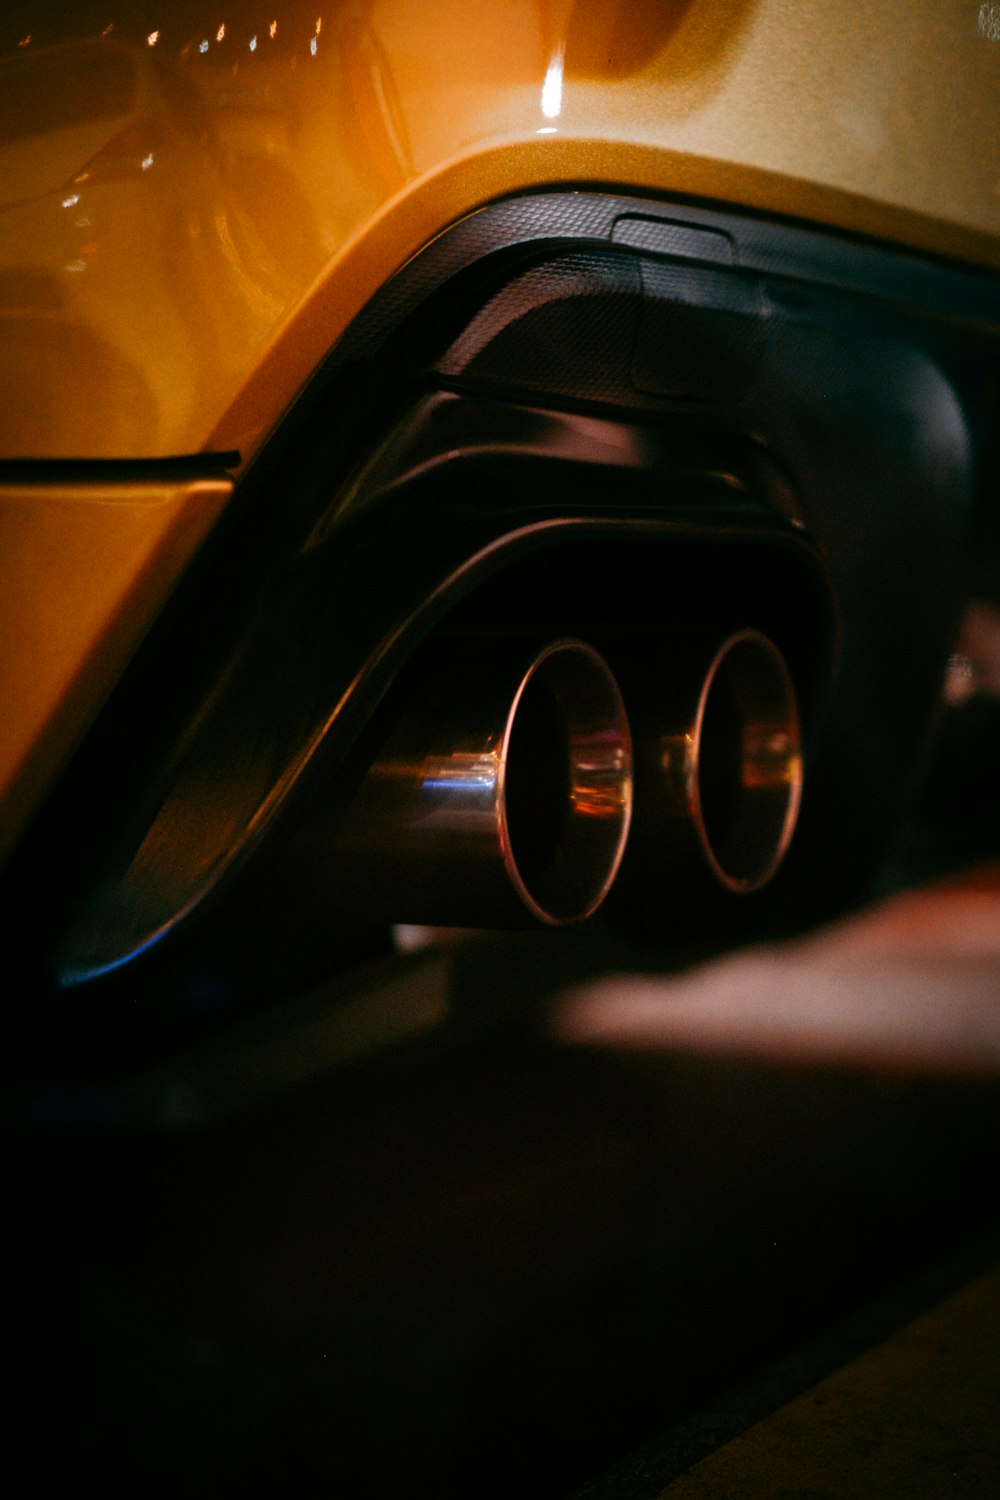 a close up of a car exhaust system